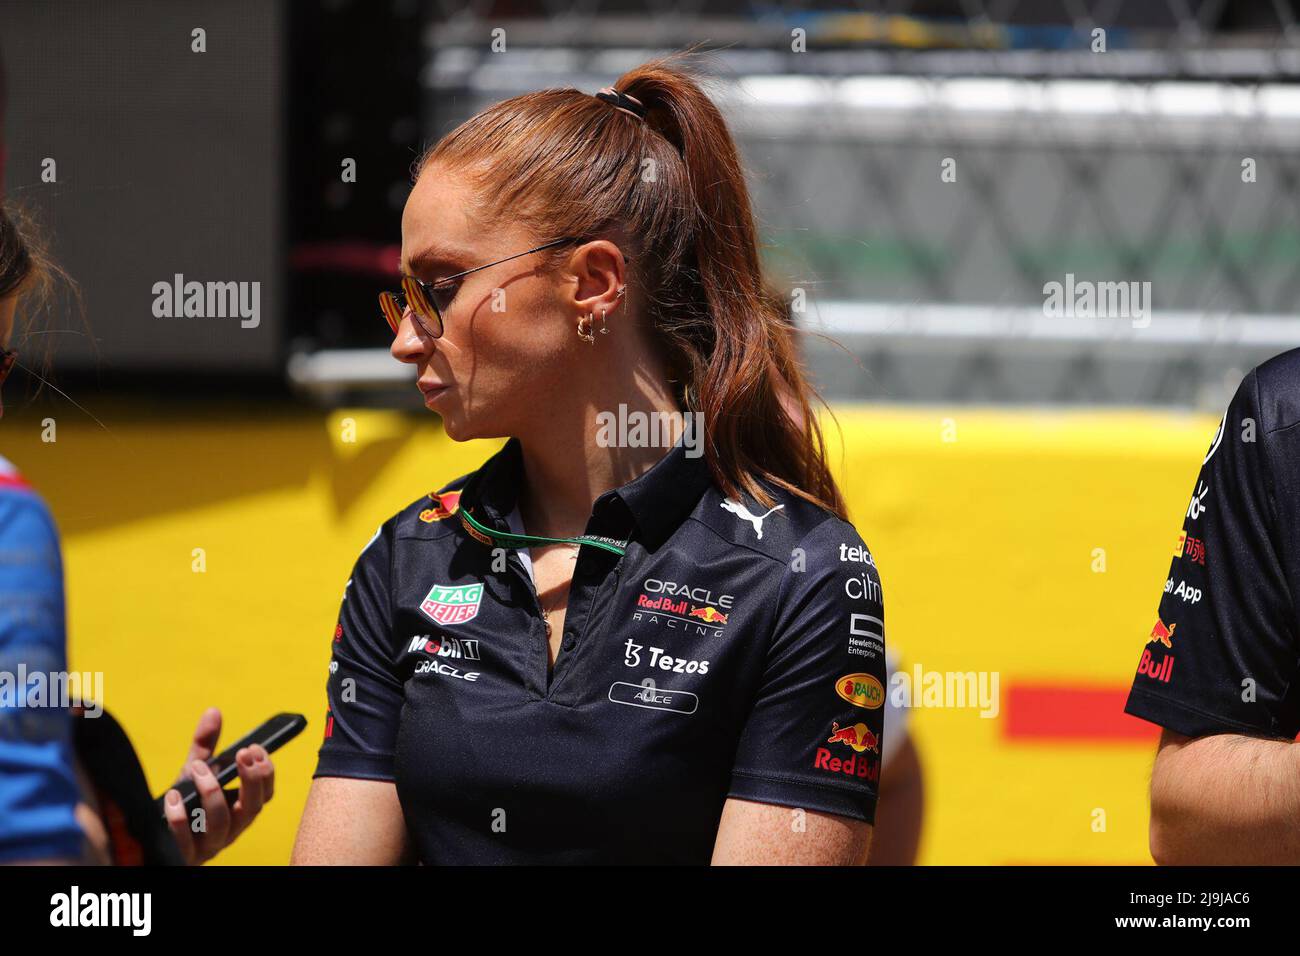 Barcelona, Spain. 22nd May, 2022. Oracle Red Bull Racing Team Girl during FORMULA  1 PIRELLI GRAN PREMIO DE ESPAÃ&#x91;A 2022 Race, Formula 1 Championship in  Barcelona, Spain, May 22 2022 Credit: Independent